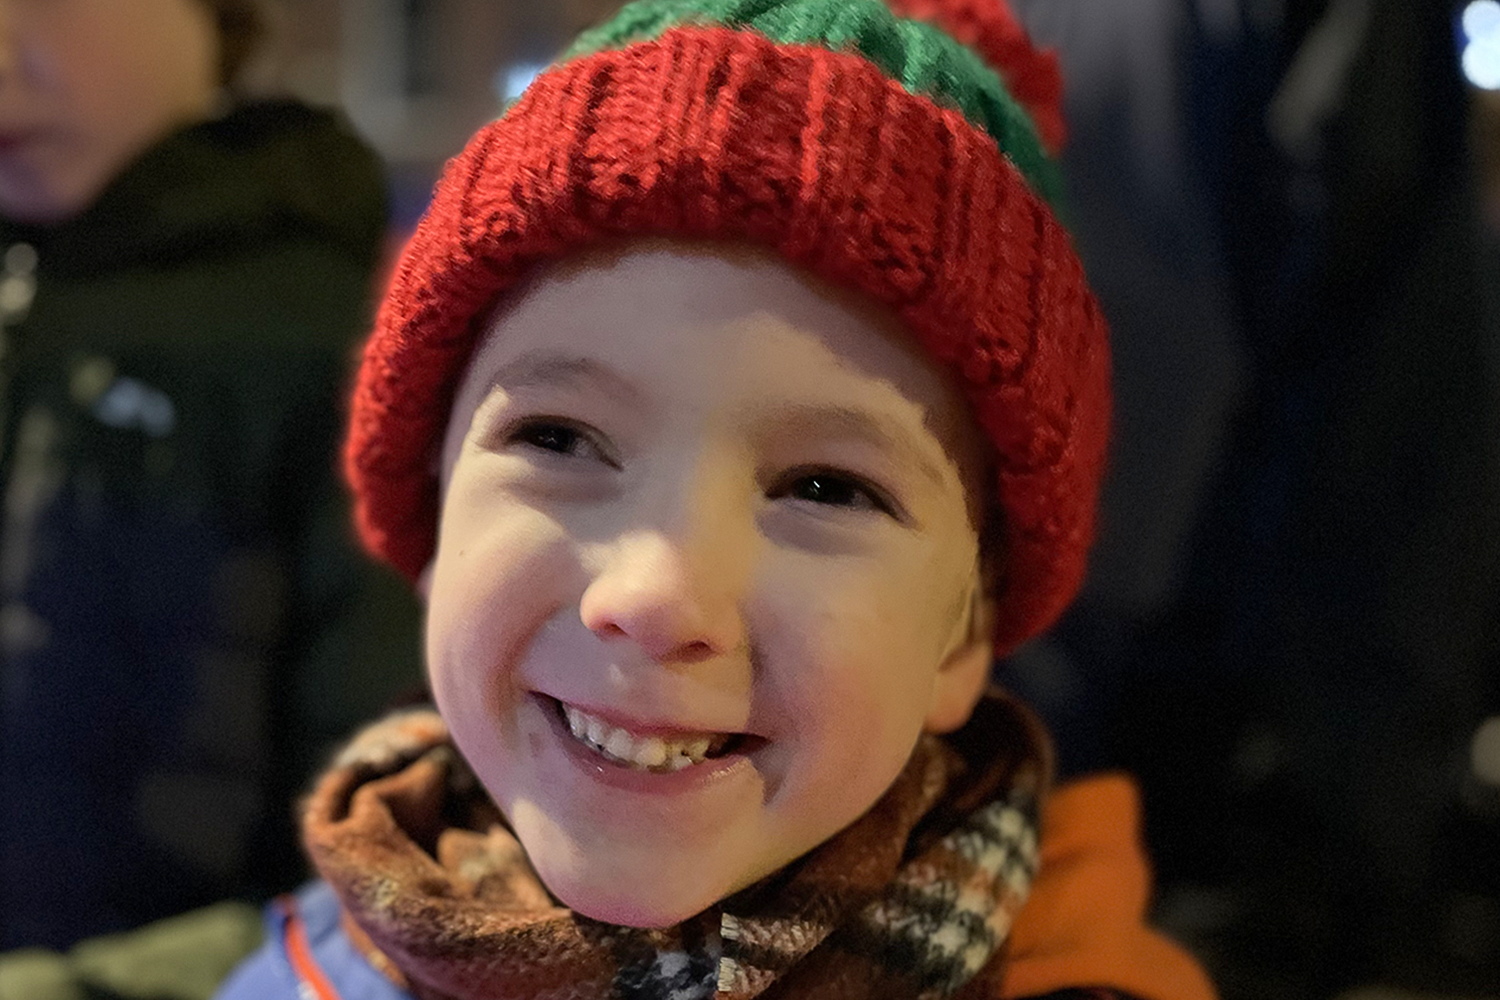 Gabe wearing a red and green bobble hat smiling close to the camera